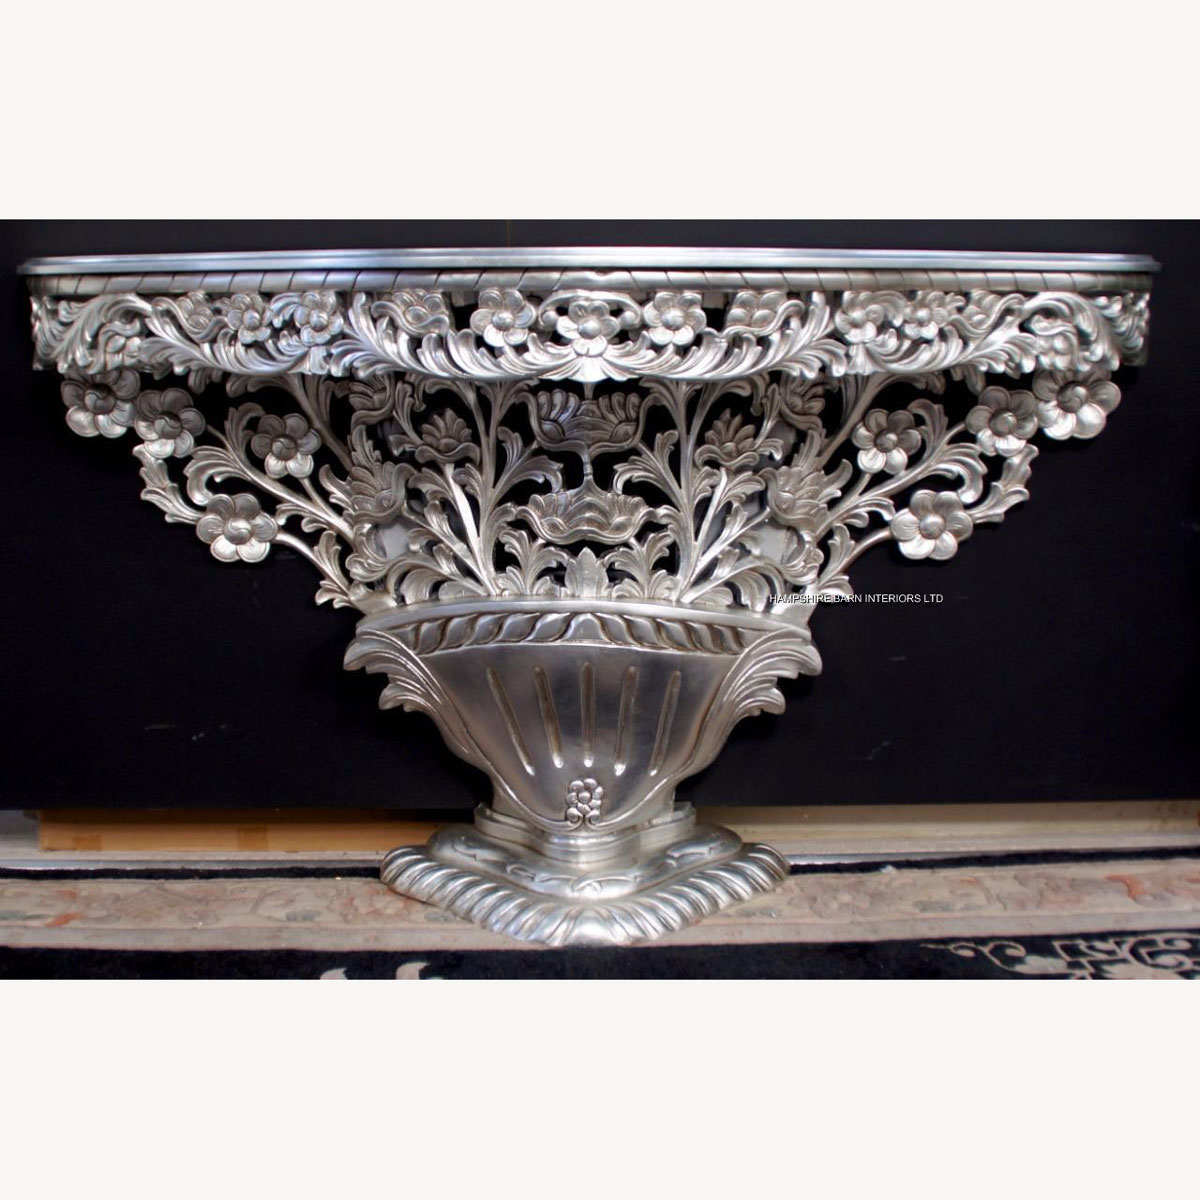 Bouquet De Fleur Silver Leaf Hall Console Table Flower Carved Mahogany Also In Gold 2 - Hampshire Barn Interiors - Bouquet De Fleur Silver Leaf Hall Console Table Flower Carved Mahogany ( Also In Gold) -